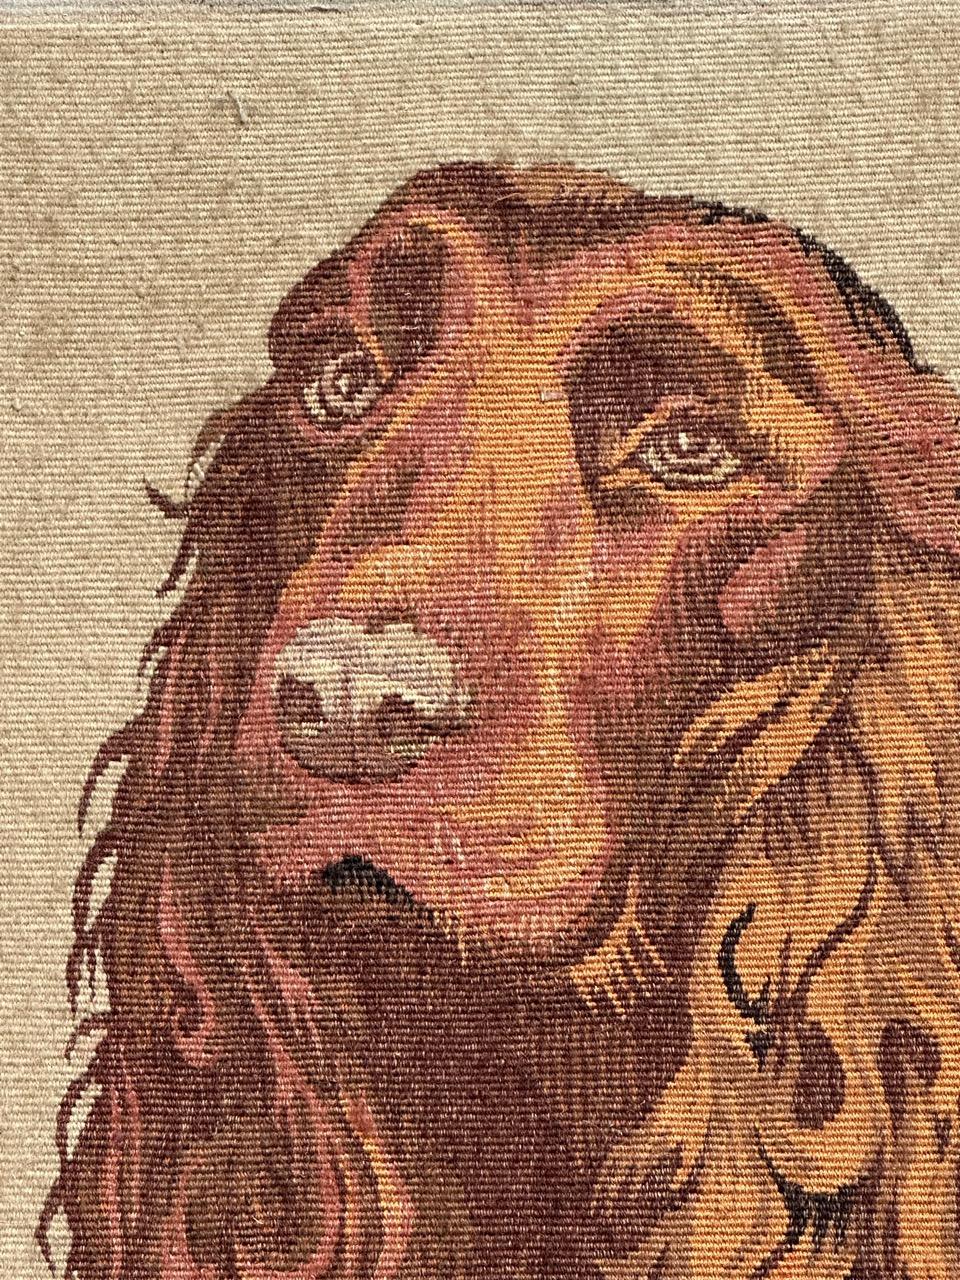 Very pretty mid century french Aubusson tapestry with beautiful design of a dog and with beautiful colours. Entirely handwoven with wool and silk on cotton foundation.

✨✨✨
